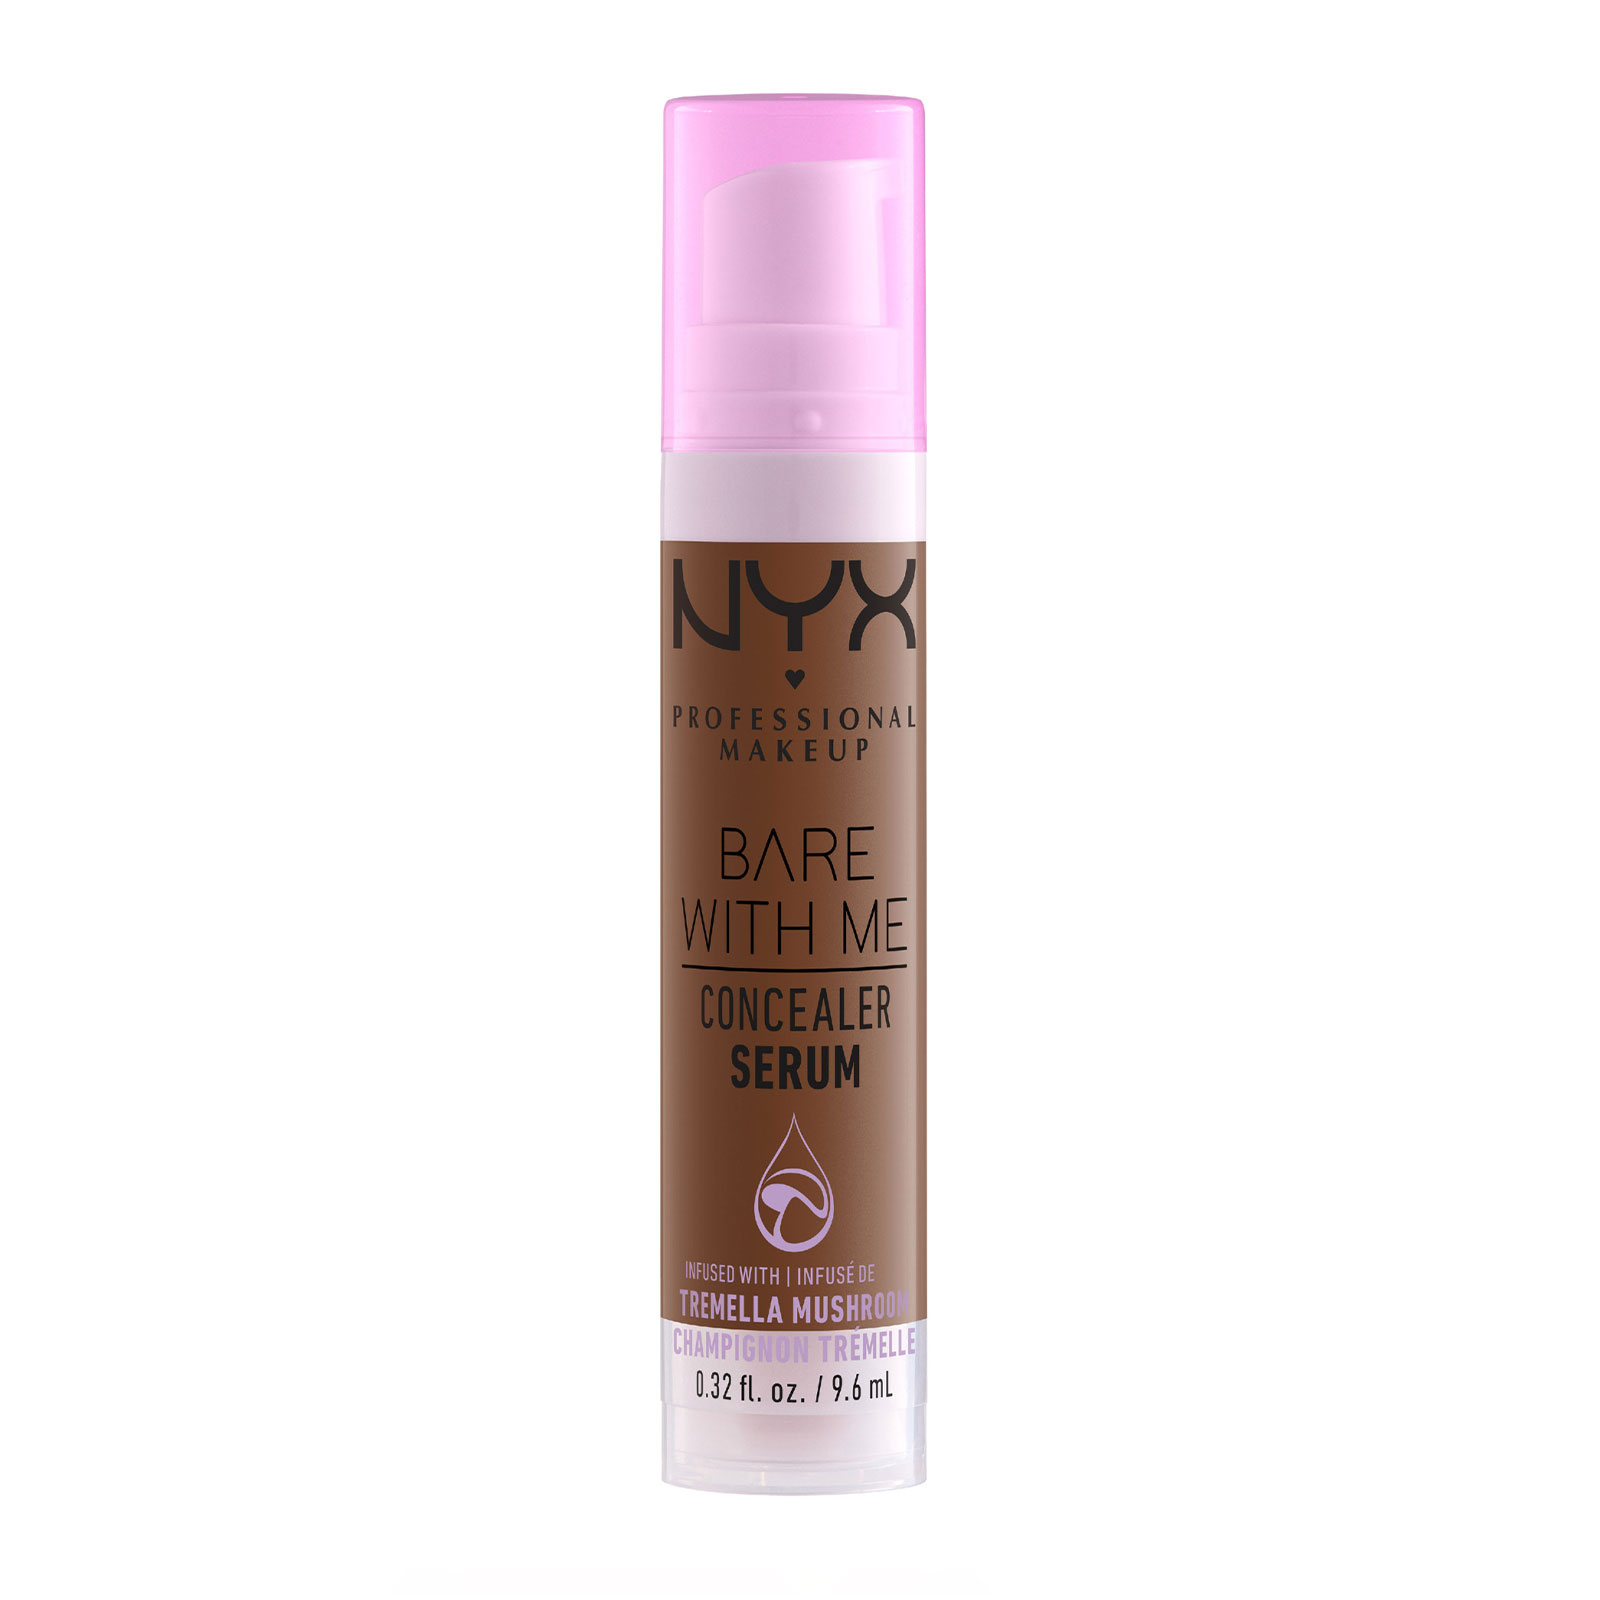 Nyx Professional Makeup Bare With Me Concealer Serum 9.6Ml 12 Rich